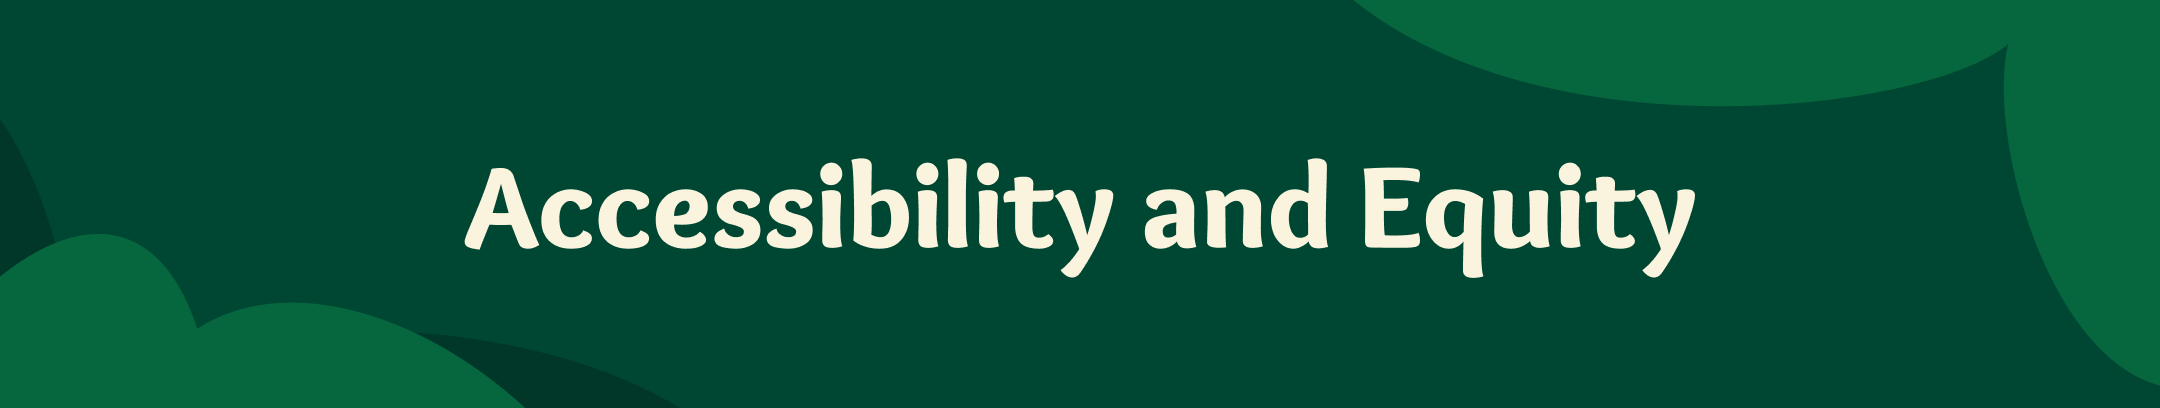 This is a wide banner-like image with a dark green background and the words “Accessibility and Equity” in large, white text centered across the slide.